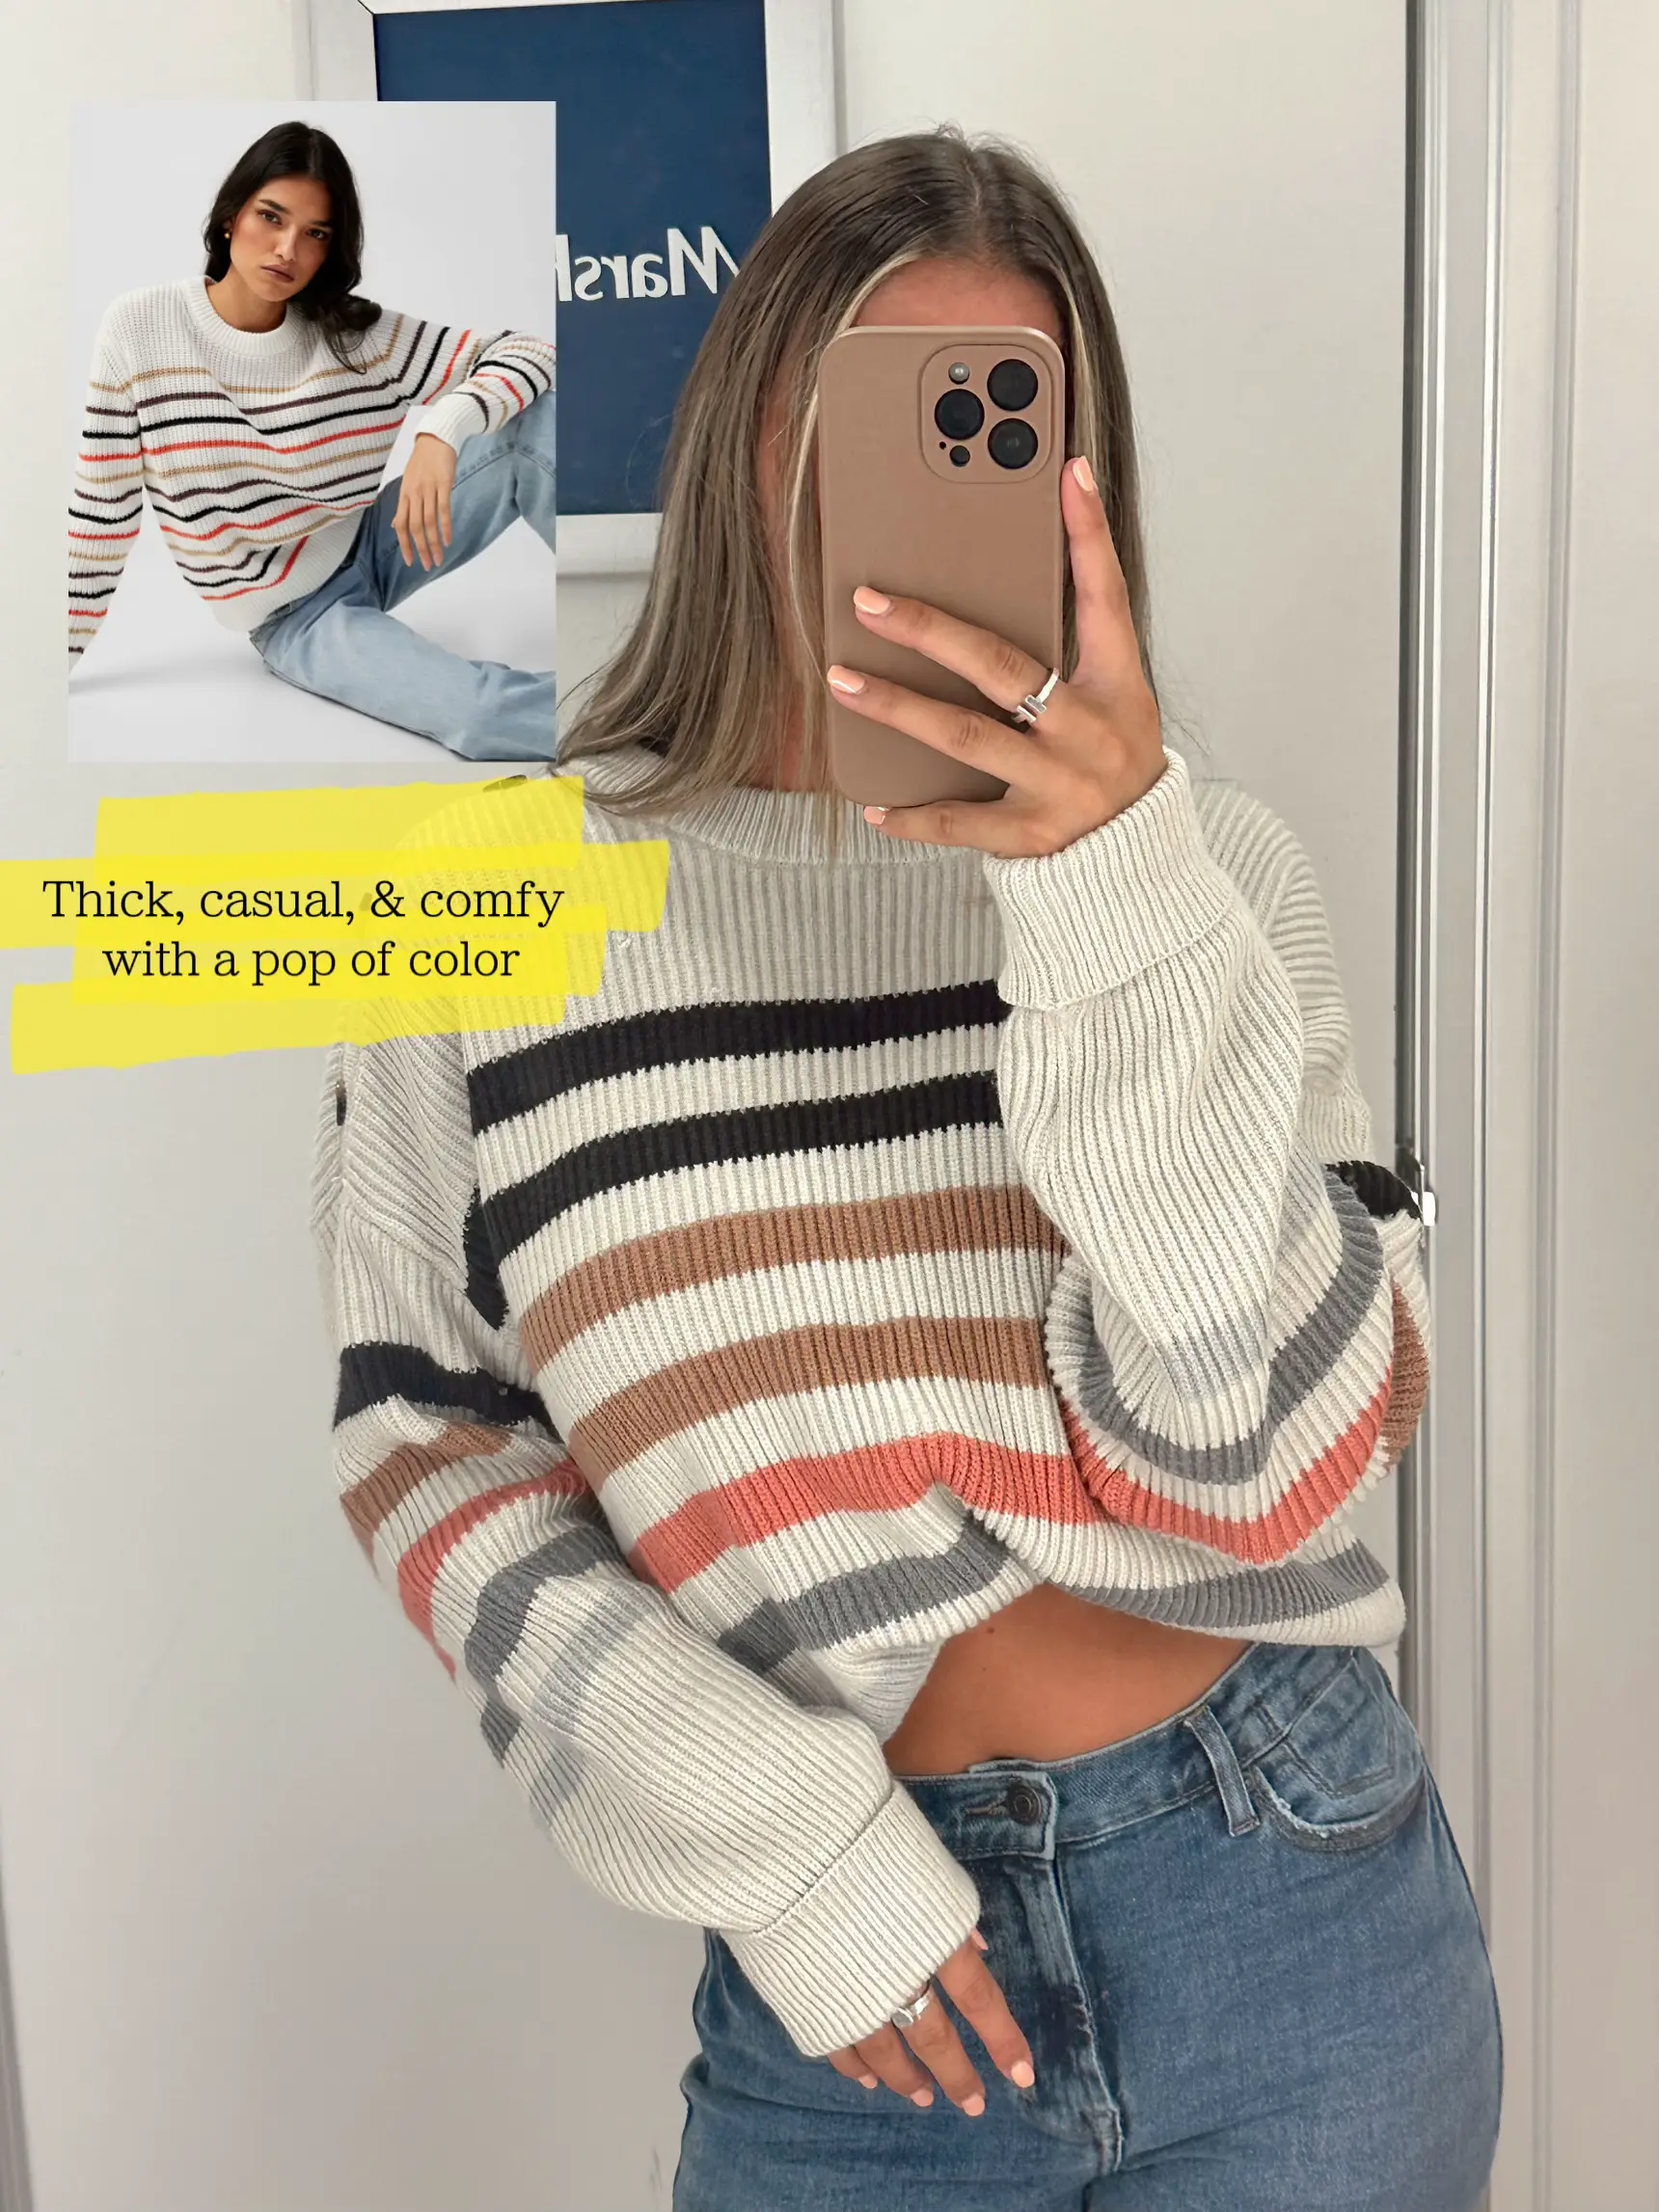 Cynthia Rowley Sweaters At Marshalls Outlet